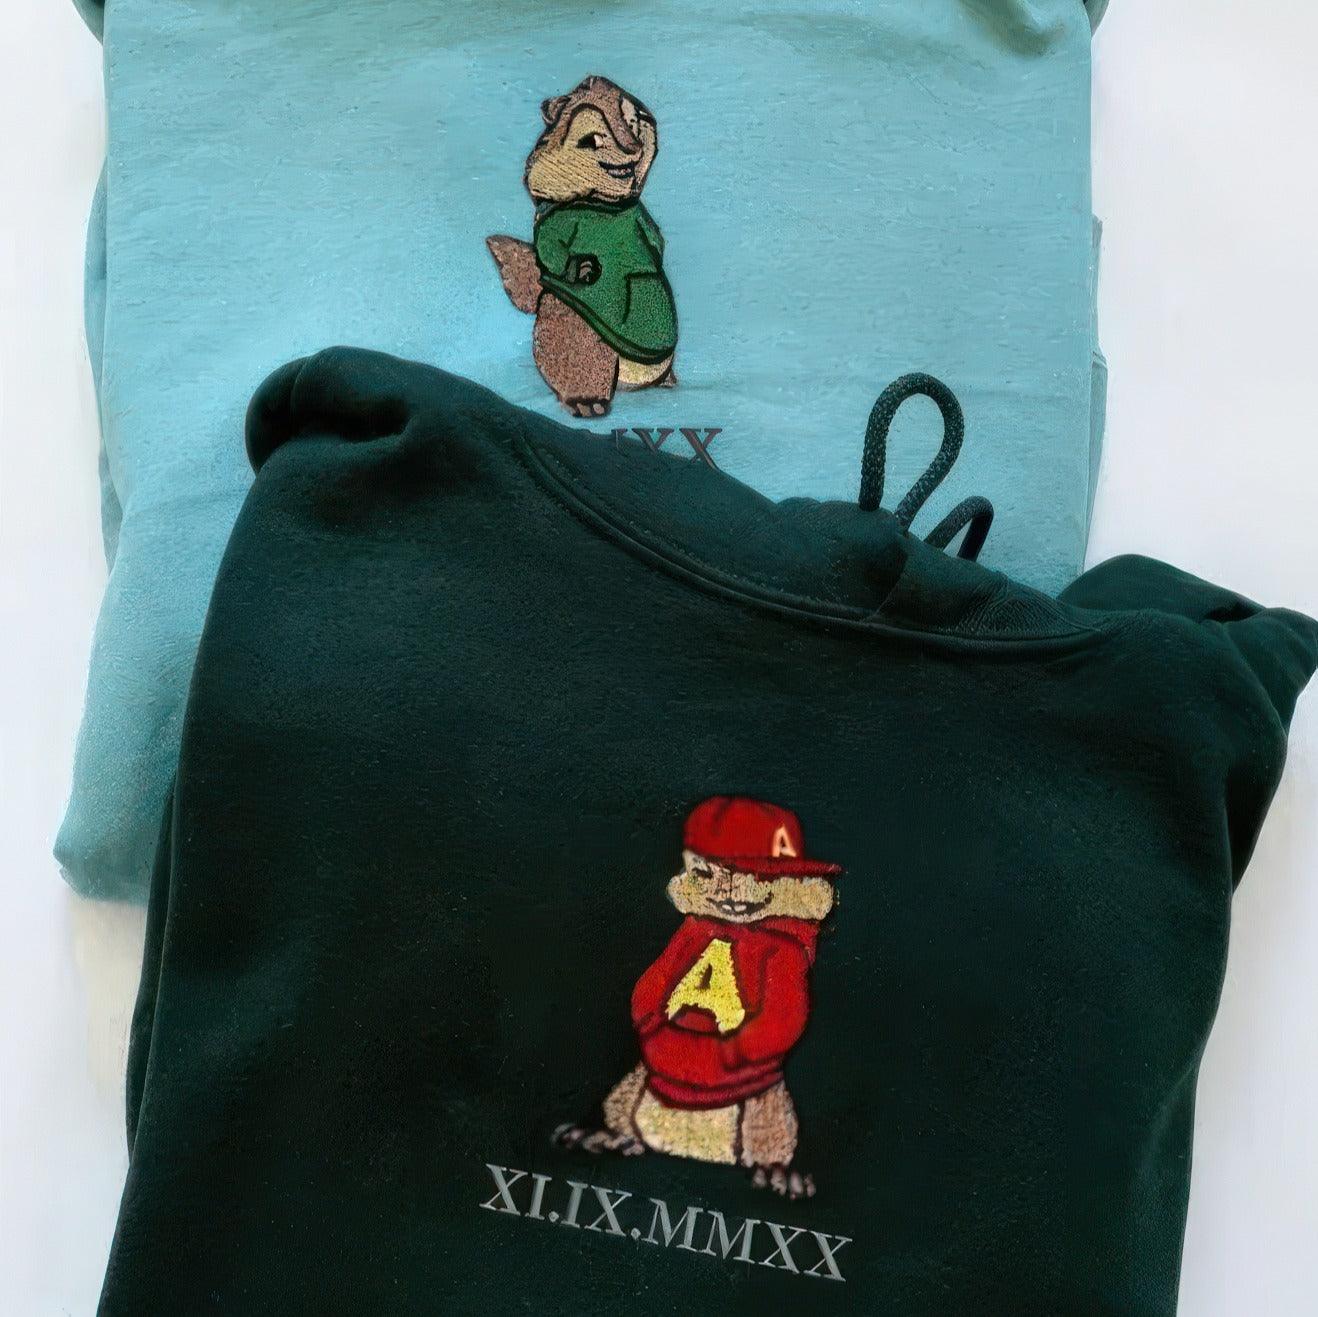 Custom Embroidered Hoodies For Couples, Best Matching Hoodies For Couples, Cute Chipmunks Cartoons Character Embroidery Sweatshirt